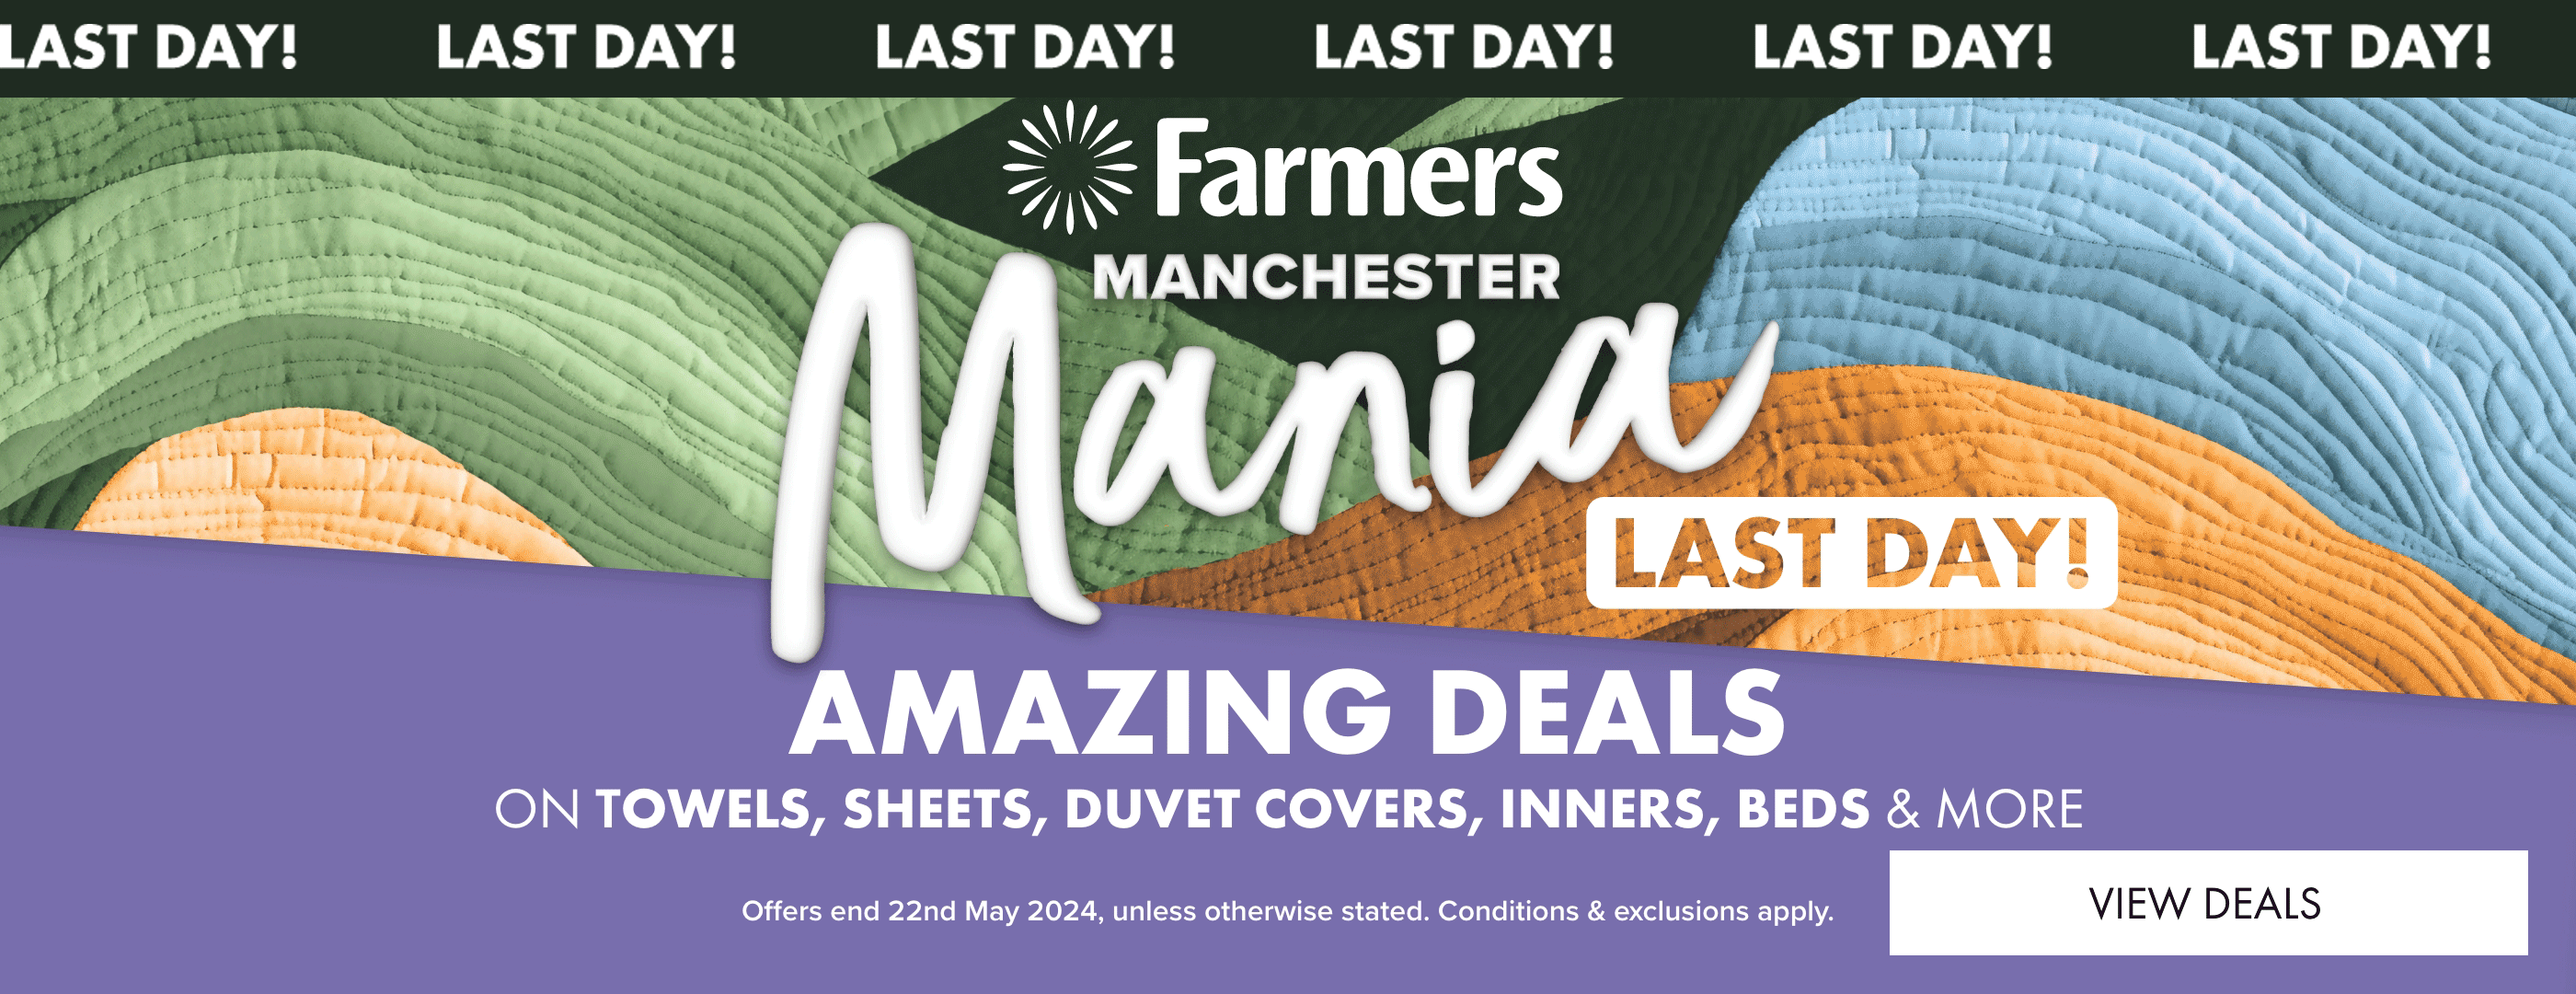 Manchester Mania Sale last day!